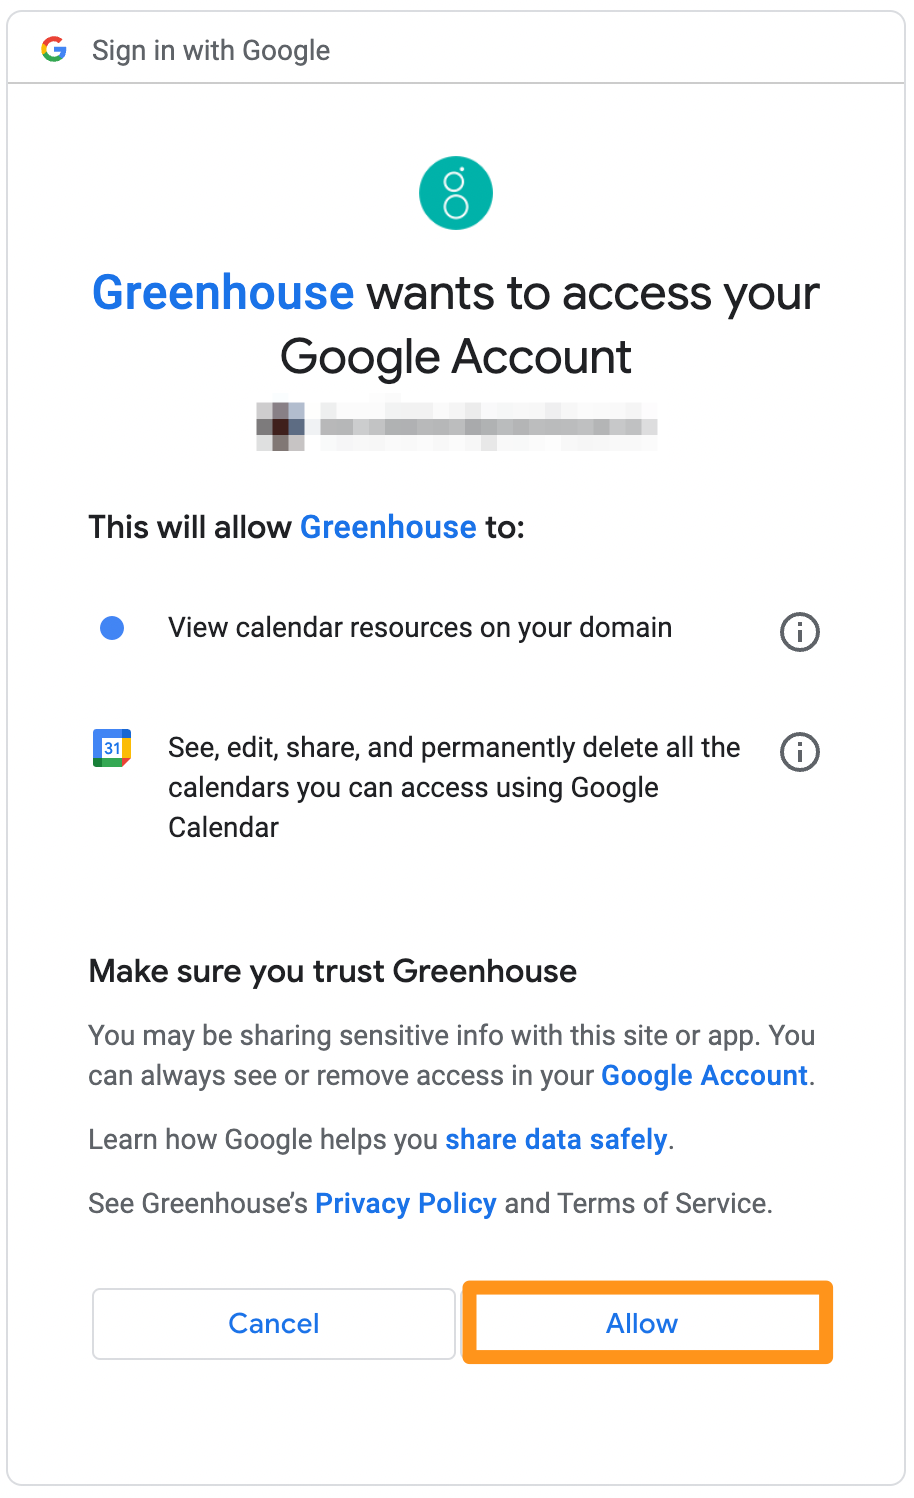 Screenshot-of-the-greenhouse-wants-to-access-your-google-account-page.png